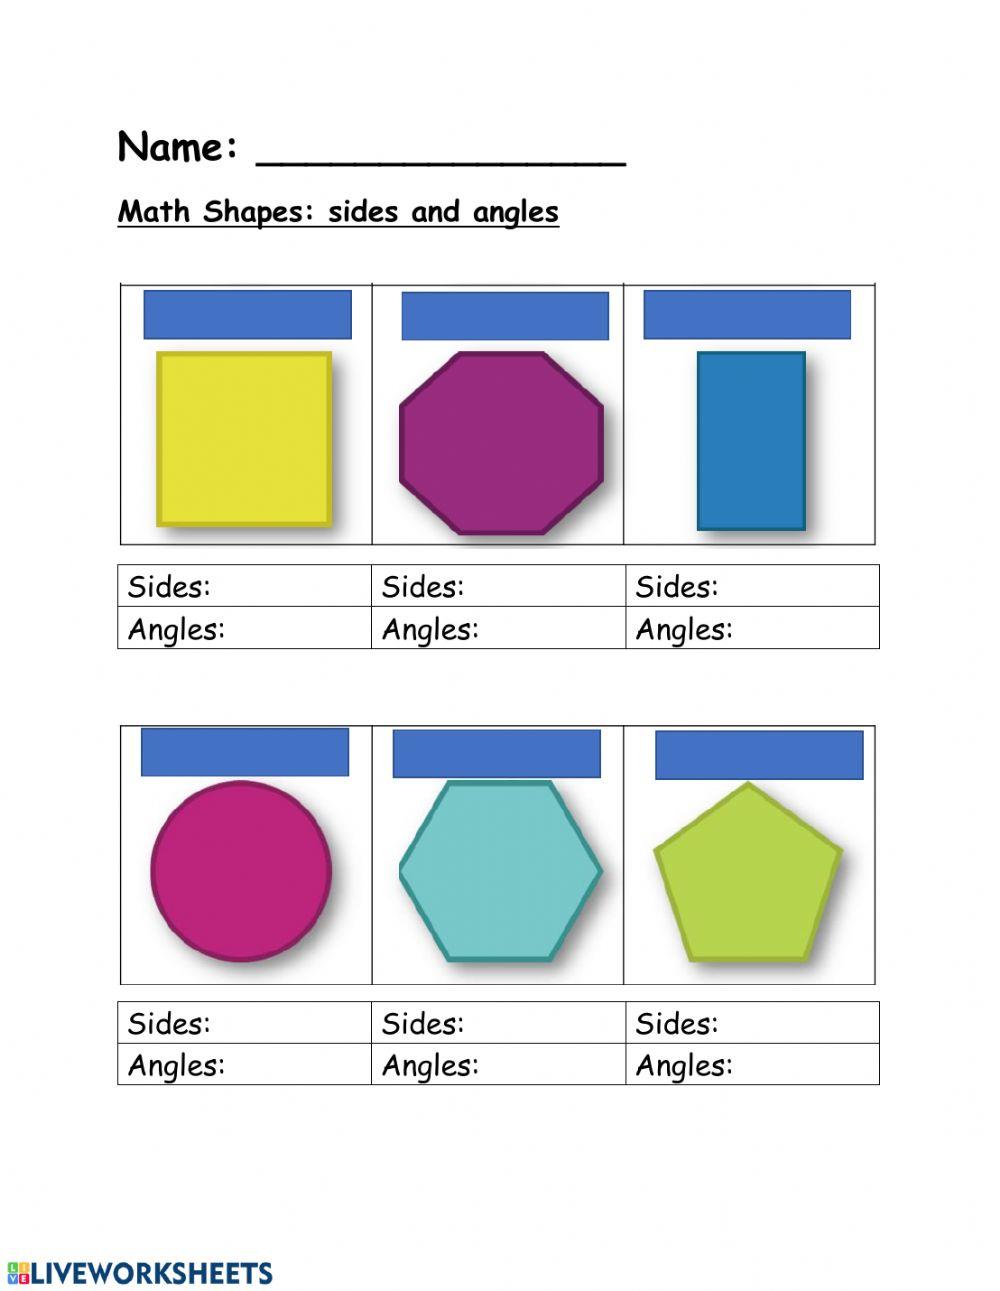 Shapes: angles and sides